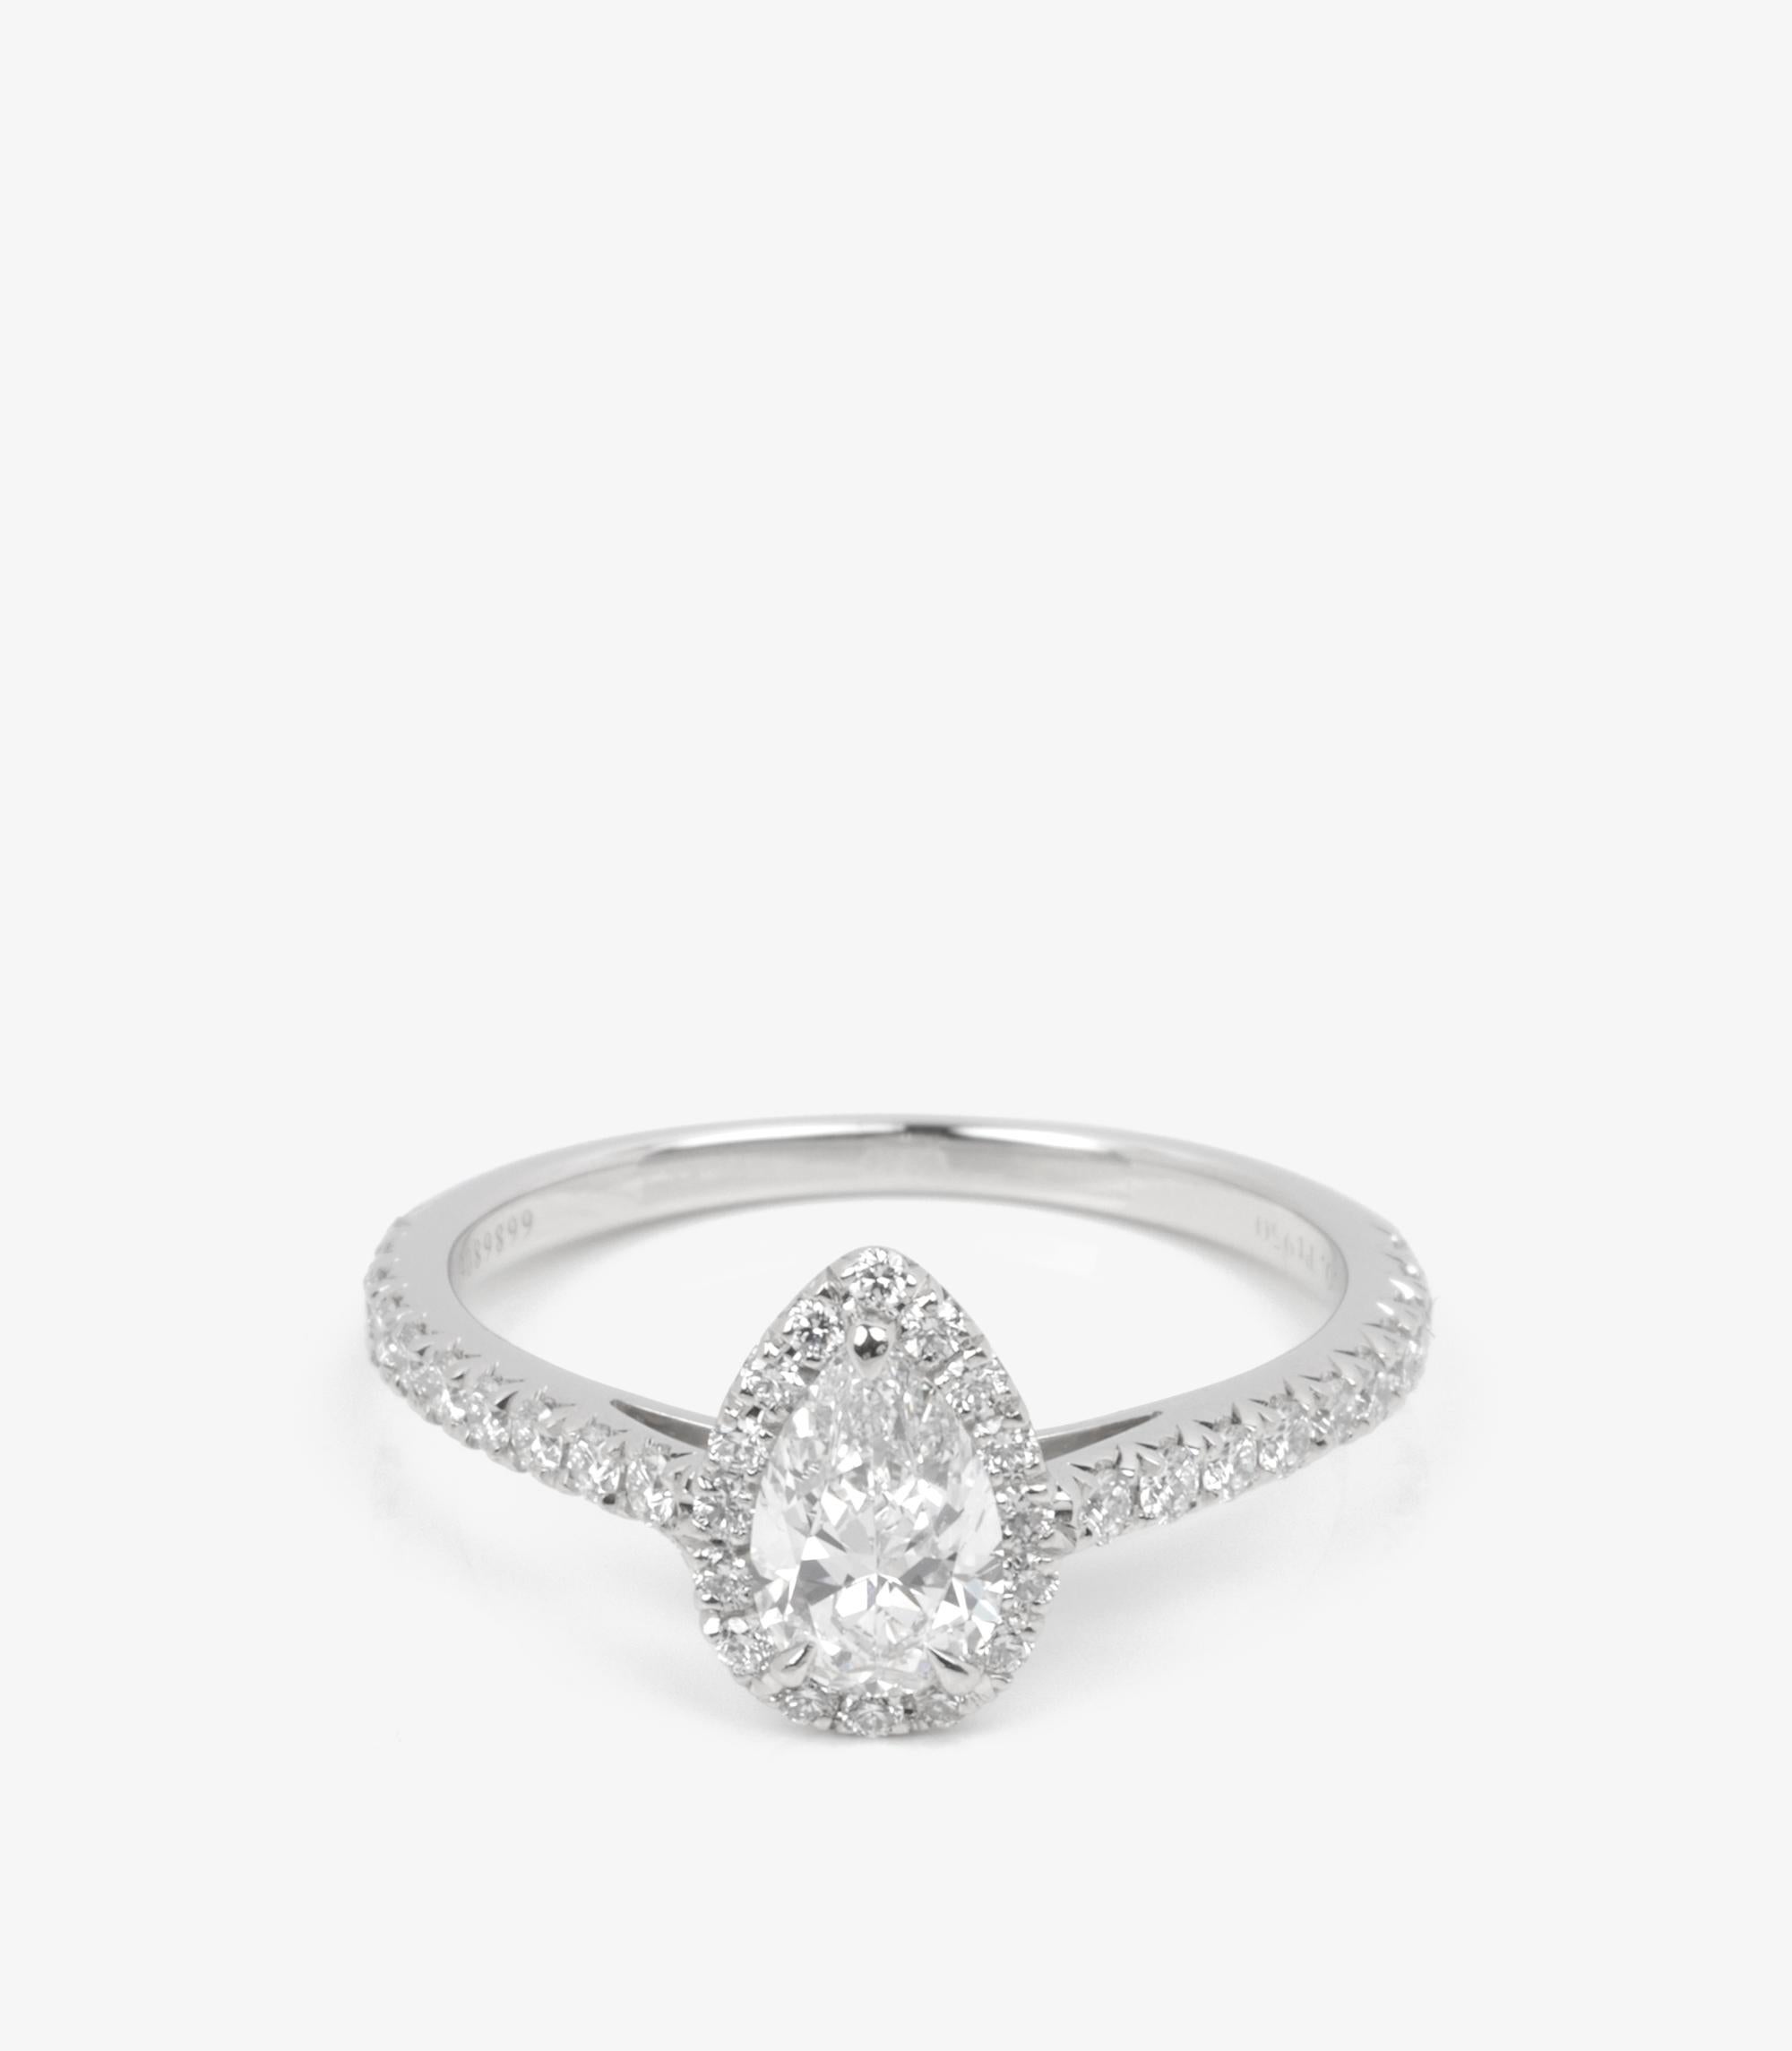 Tiffany & Co. 0.42ct Pear Cut Diamond Platinum Soleste Ring In Excellent Condition For Sale In Bishop's Stortford, Hertfordshire